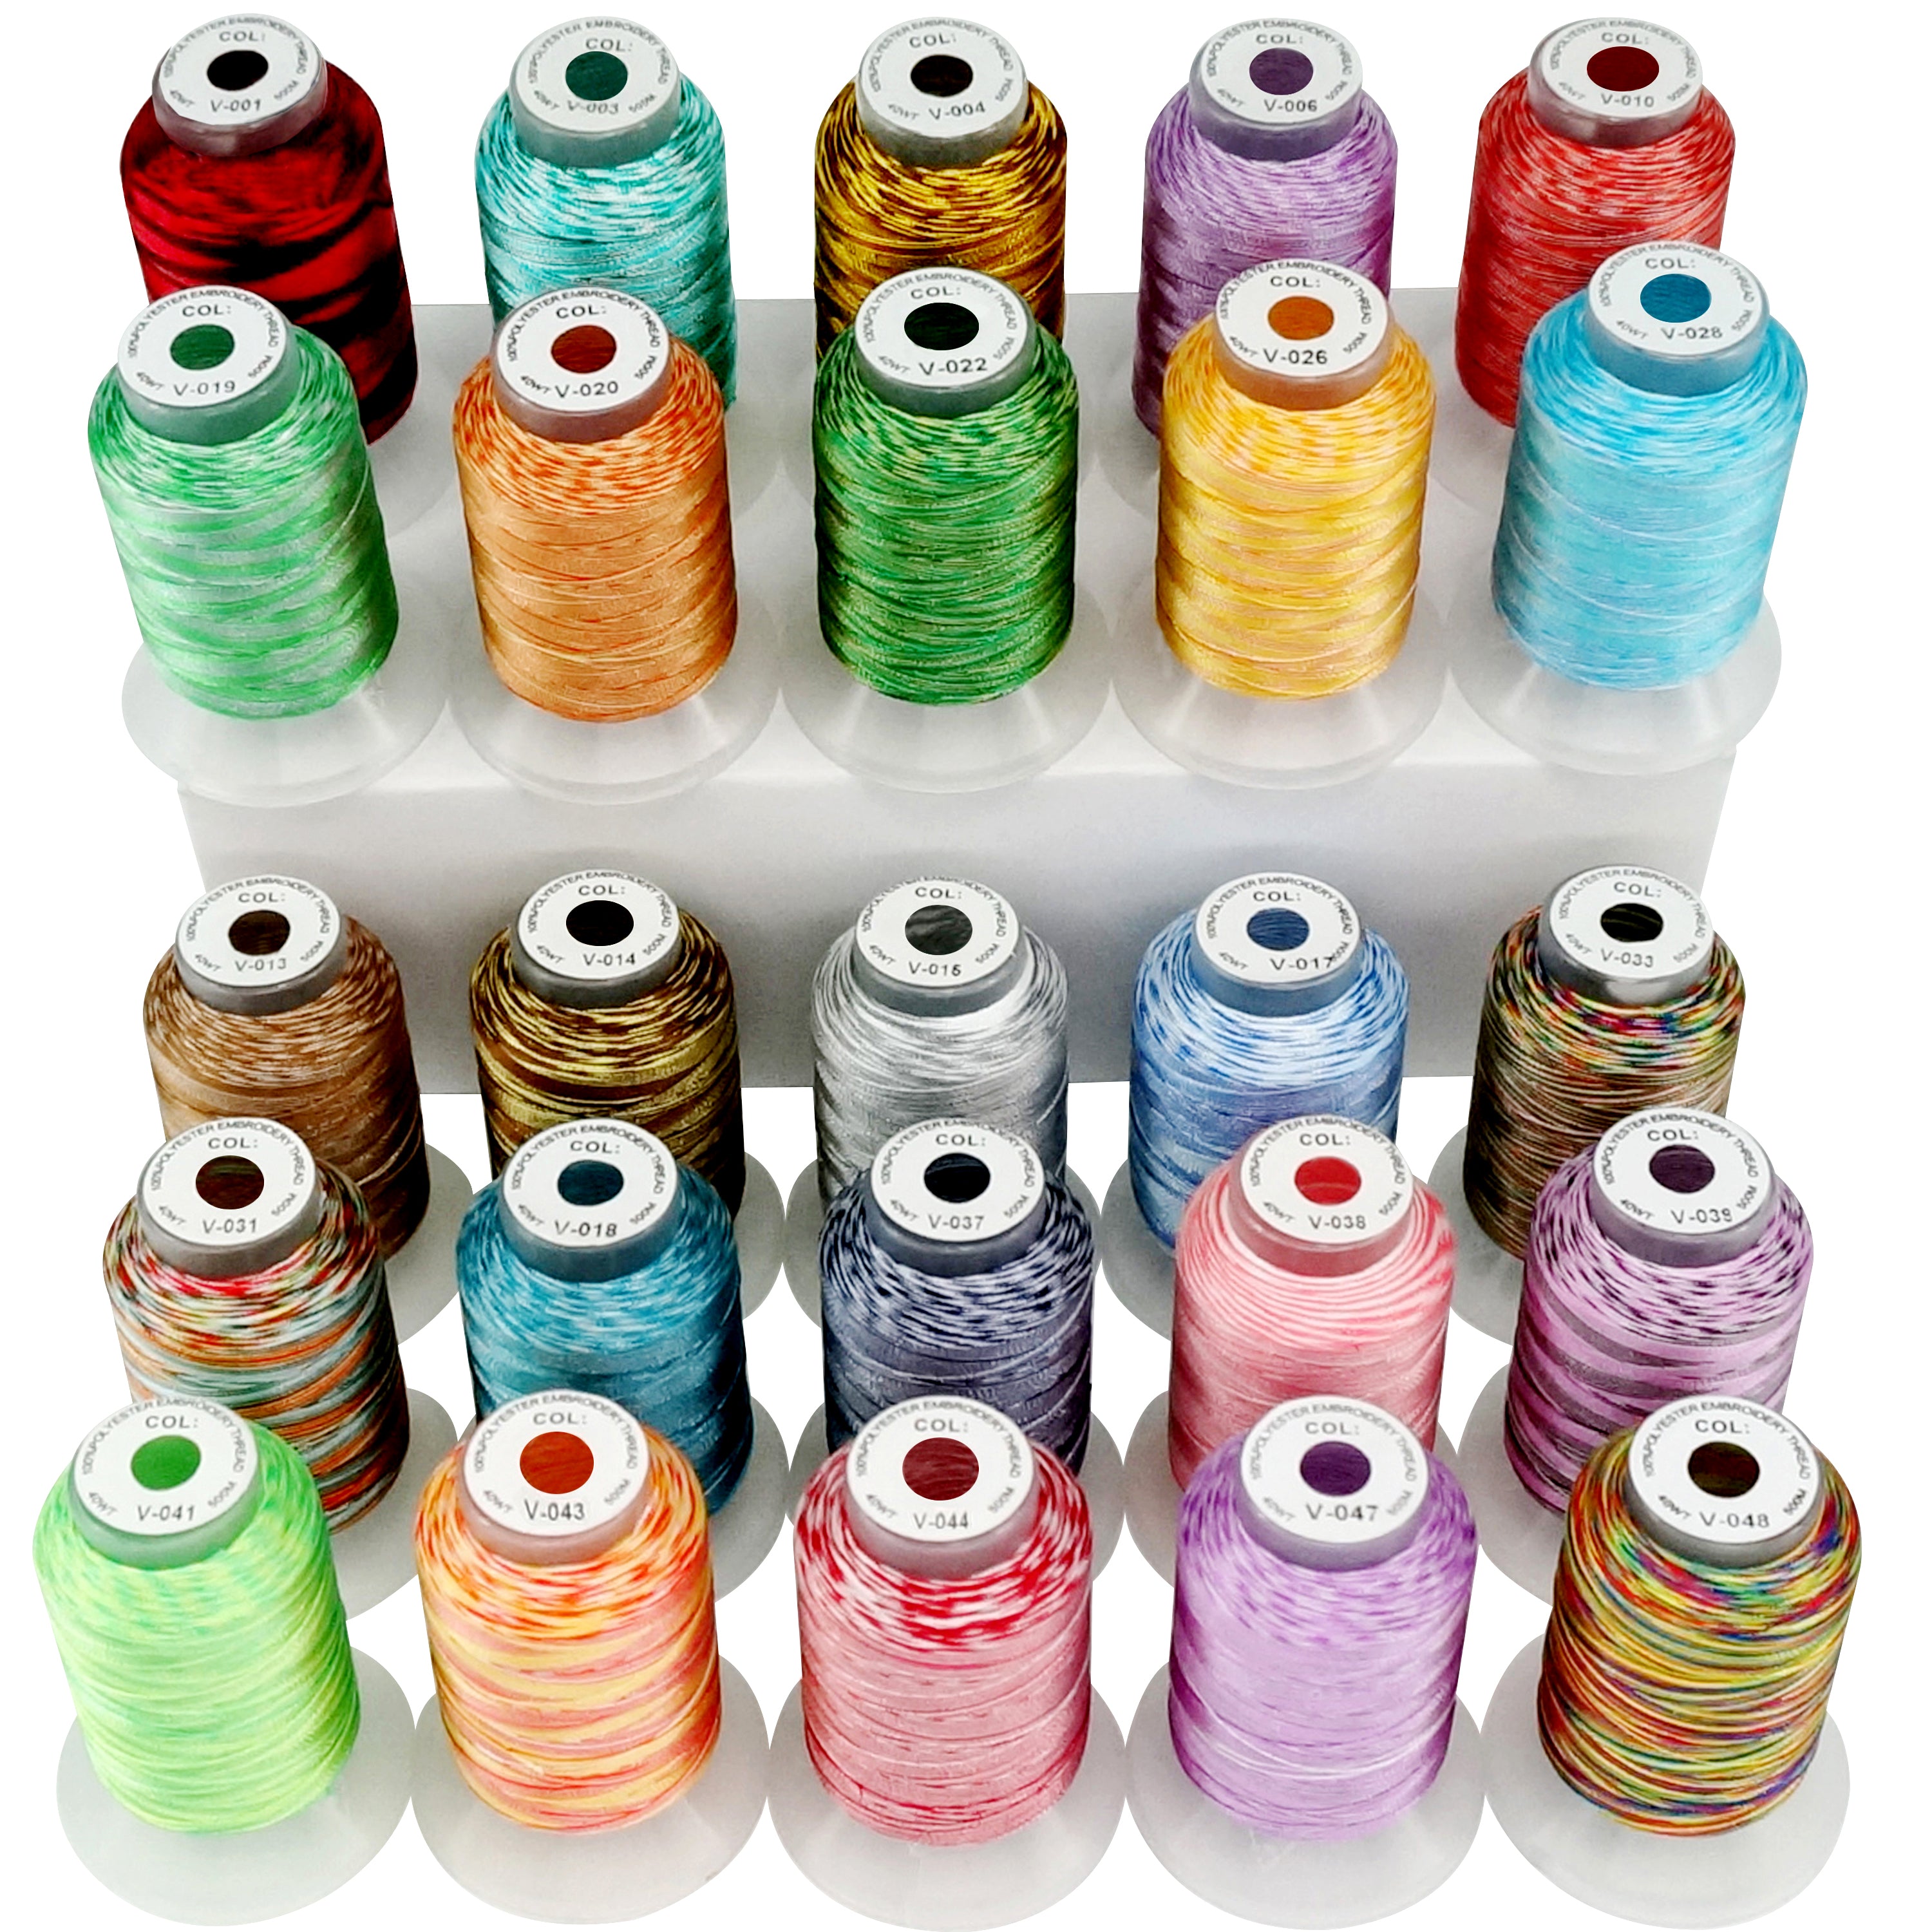 New Brother Colors Series Computer Machine Embroidery Thread